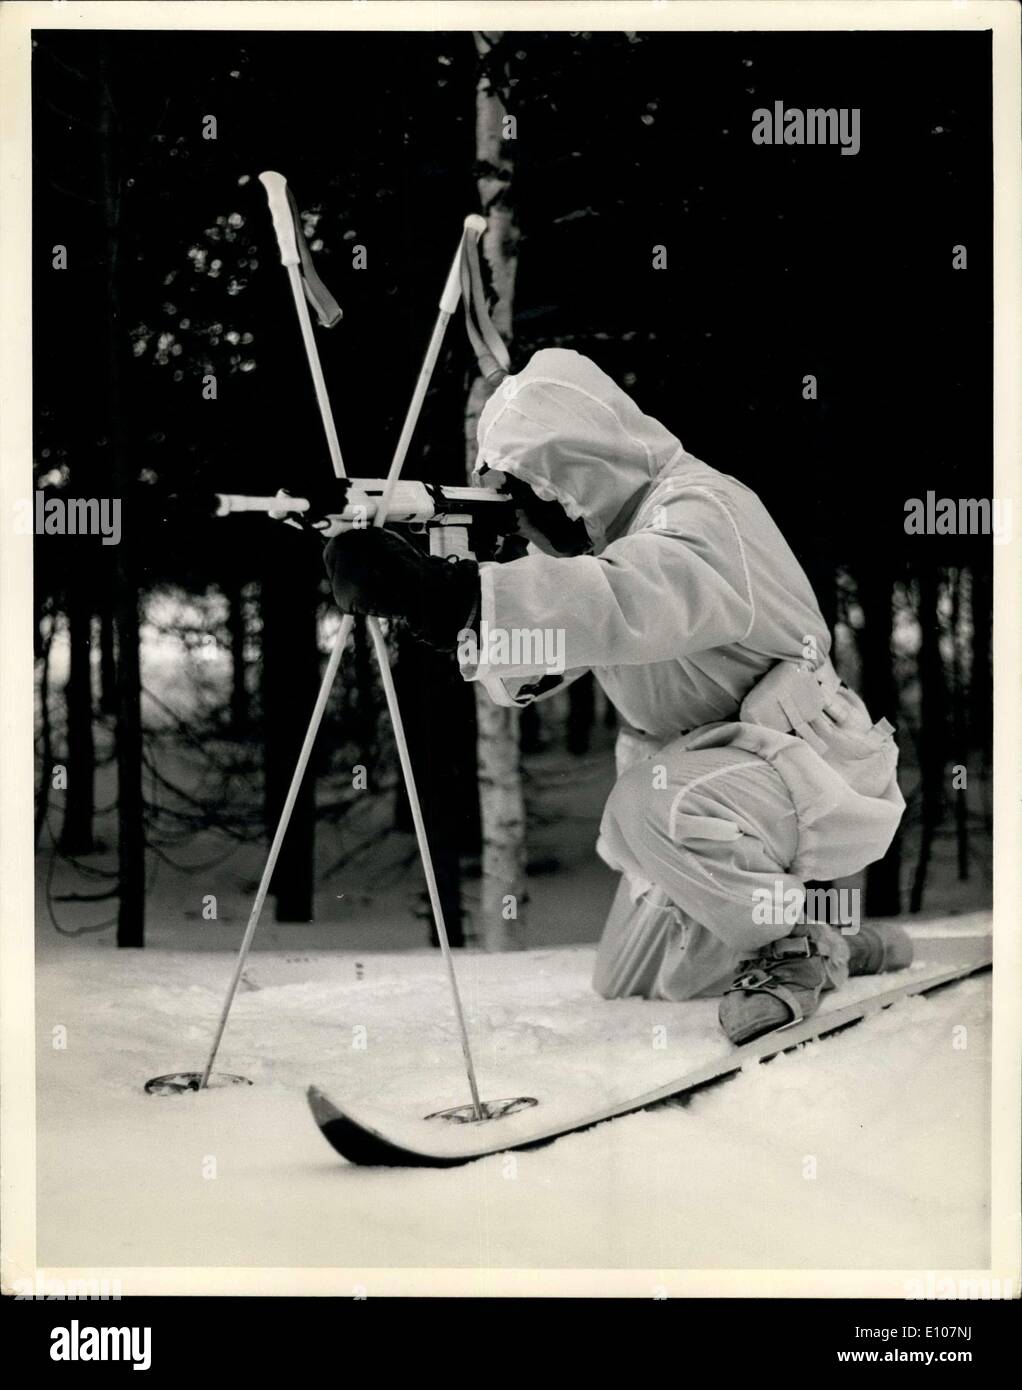 Feb. 09, 1970 - Royal Marine Commandos in the Arctic: First pictures from Norway of 45 Commando Royal Marines, Britain's first specialized Mountain and Arctic Warfare Unit undergoing extensive training in Arctic conditions. For many of the commandos it is the first experience operating in sub zero temperatures, living out in the mountains in snow holes and igloos. New equipment being tested by the marines include the Canadian ''snow tric'', a four man ski scooter and a track snow vehicle from Sweden. 45 Commando's Navy doctor is subjecting medical equipment to tests in the severe conditions Stock Photo